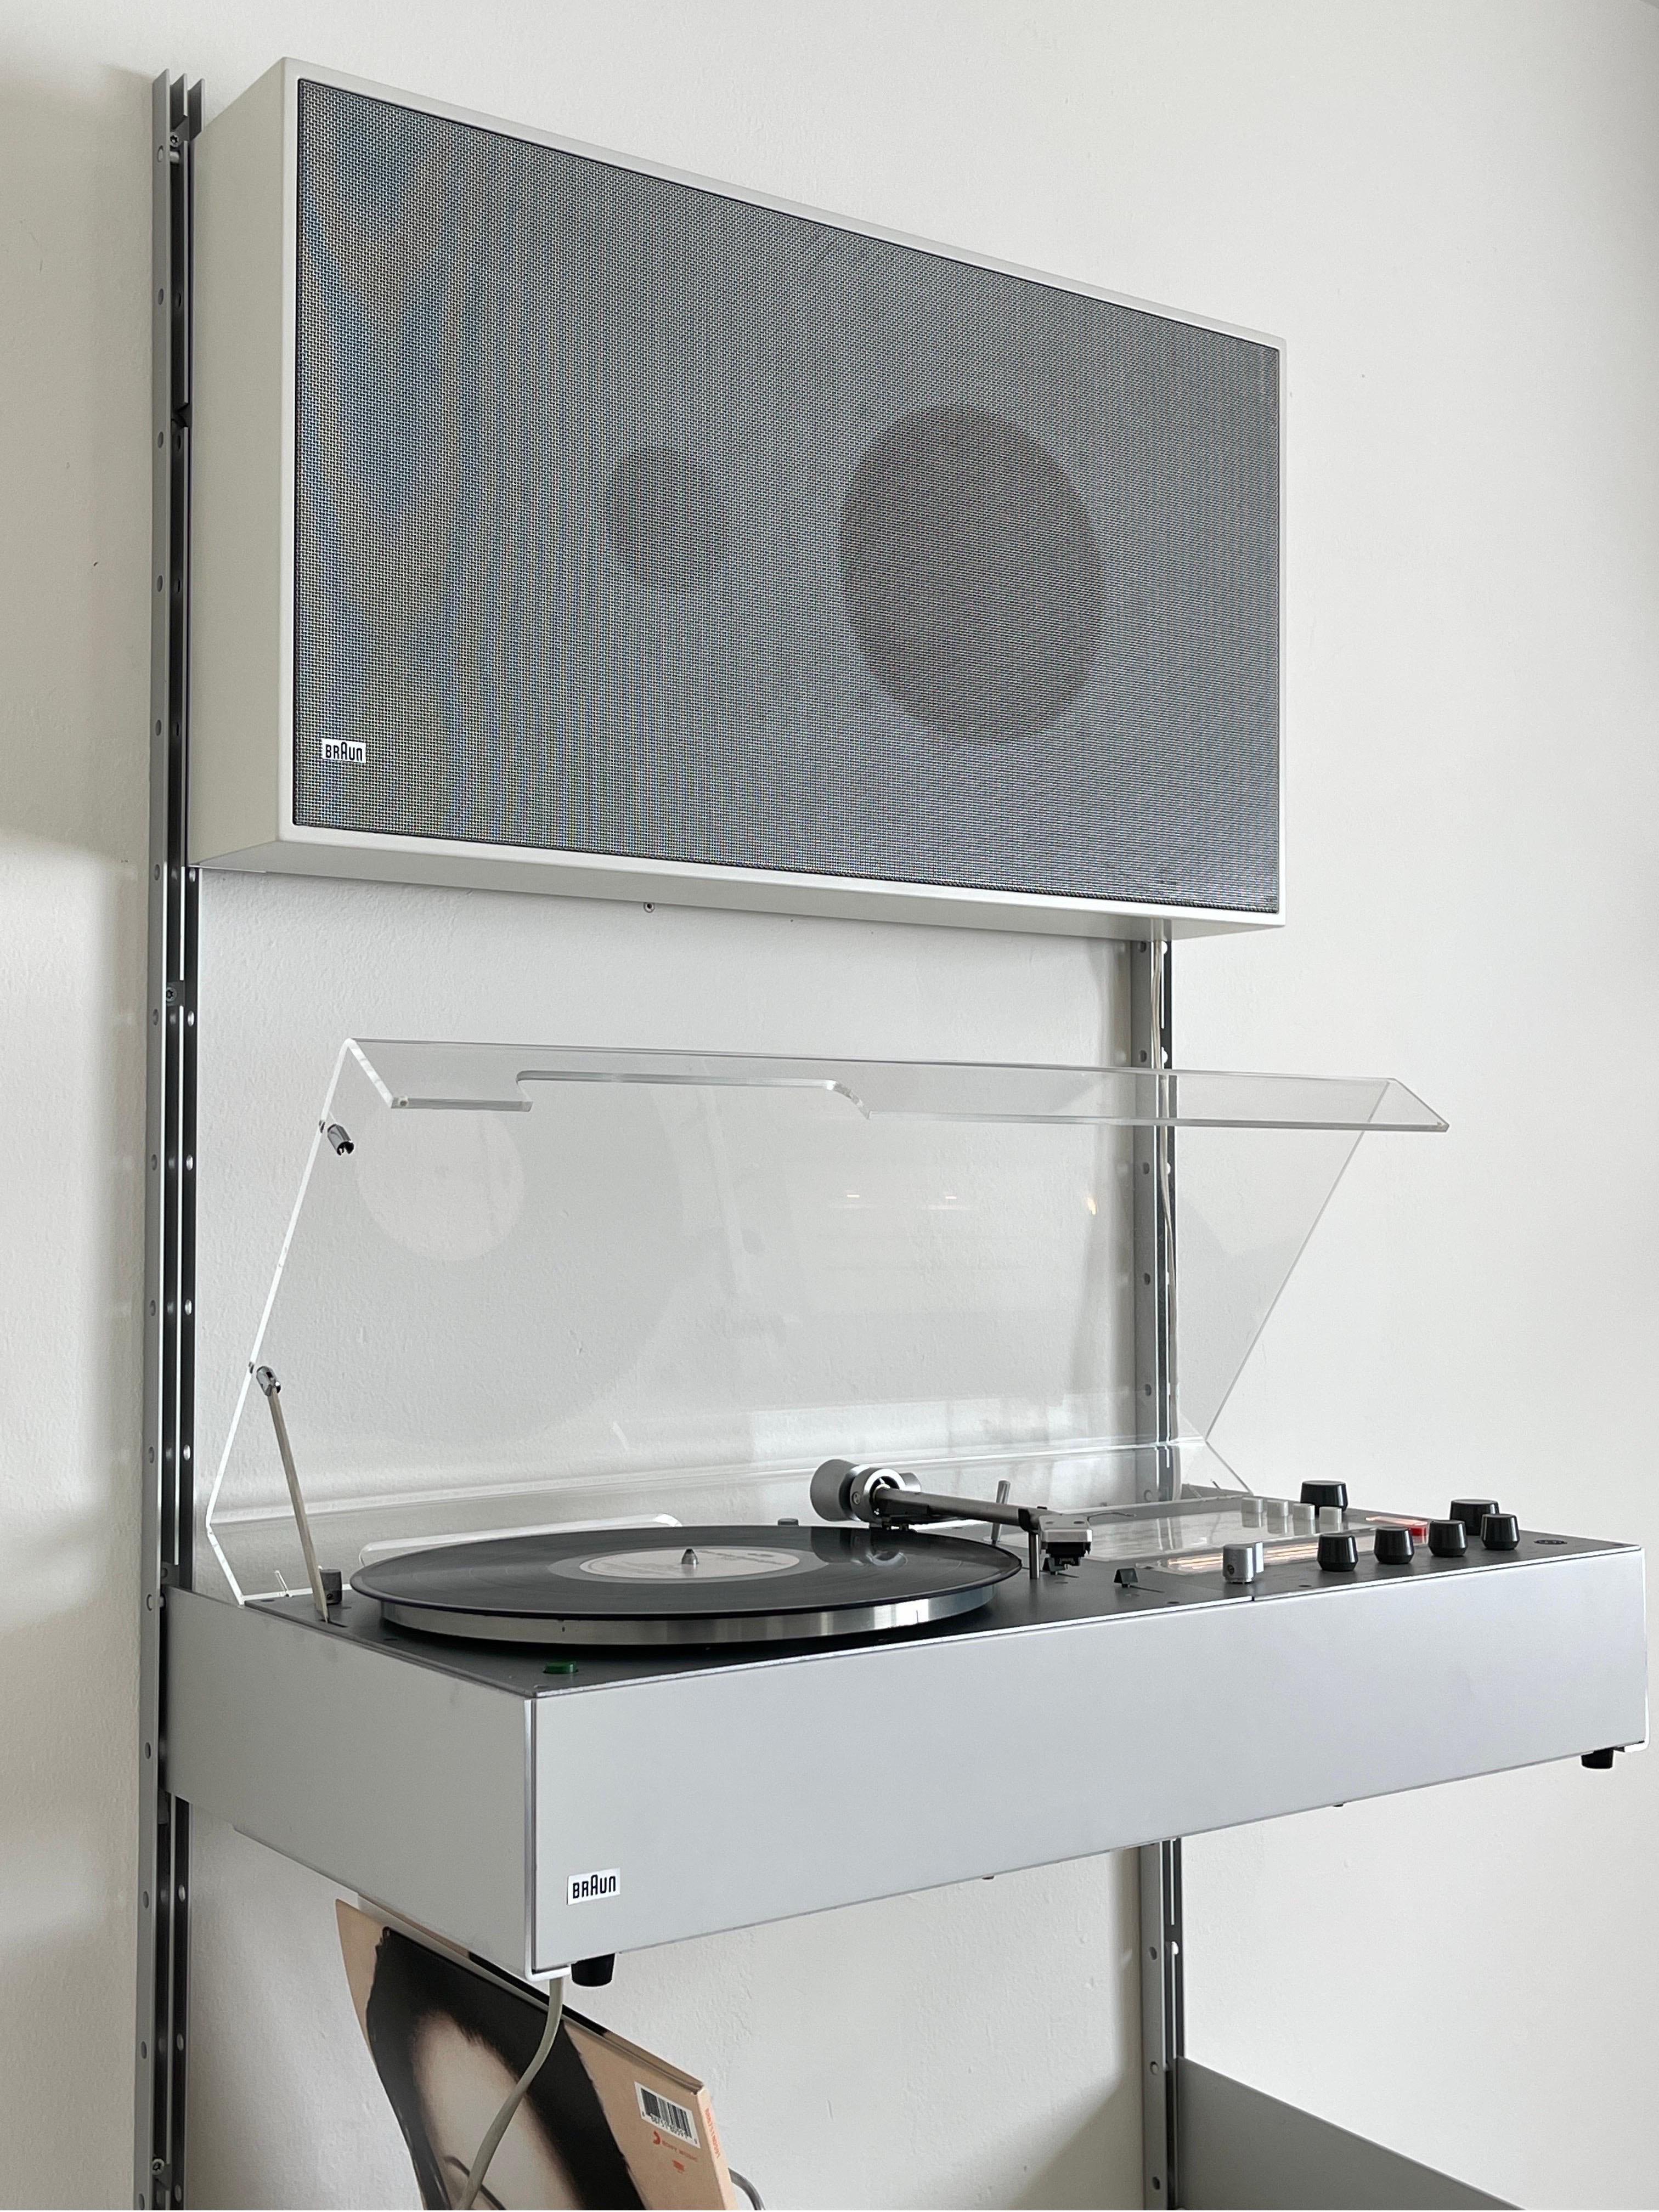 Braun Audio wall mounted audio system designed by Dieter Rams  In Good Condition For Sale In Los Angeles, CA